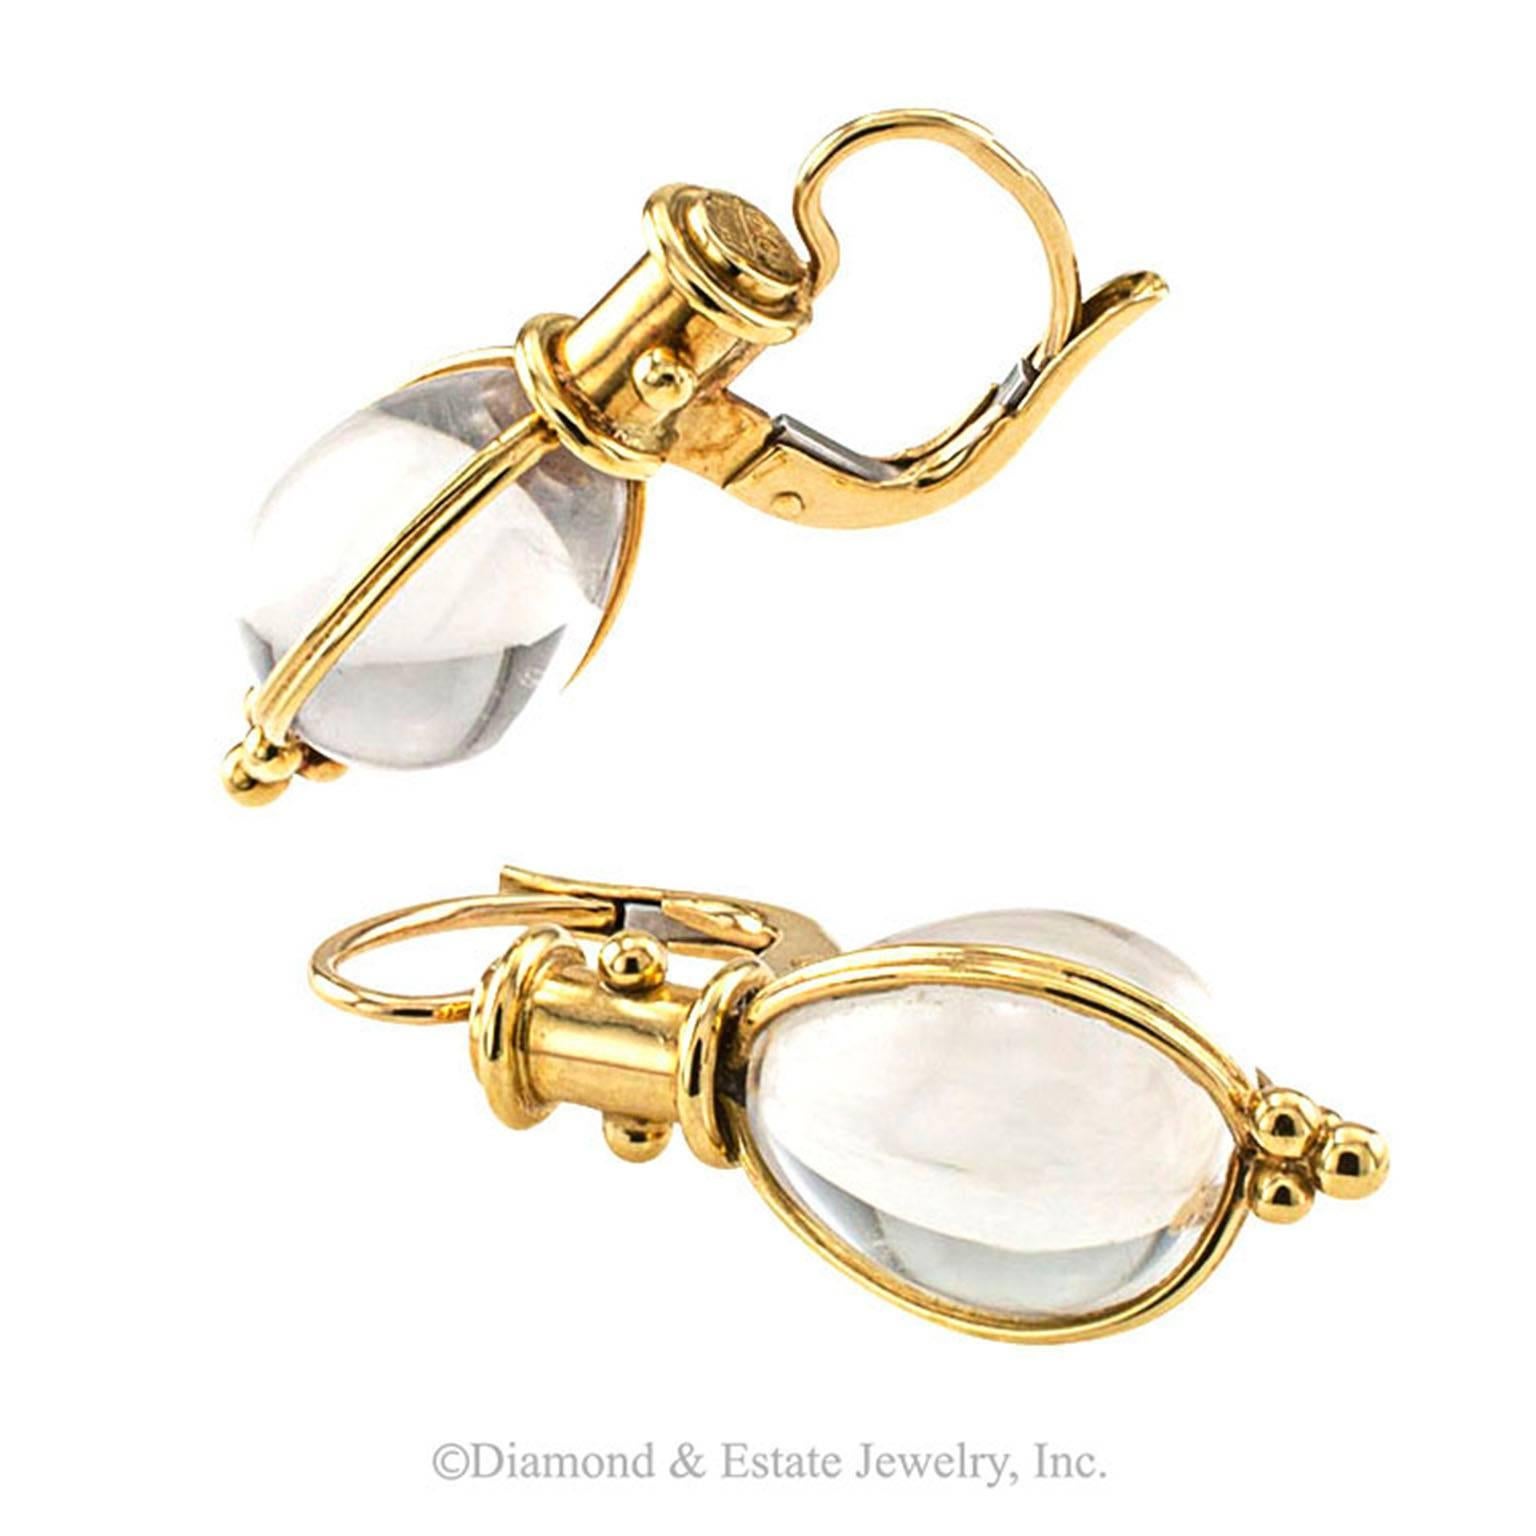 Temple St. Clair Estate Rock Crystal Amulet Earrings

Distinctive gold work and a very attractive design...  Temple St. Clair's  rock crystal Amulet earrings crafted in 18 karat yellow gold... Easy to wear, casual elegance... As if by magic, they